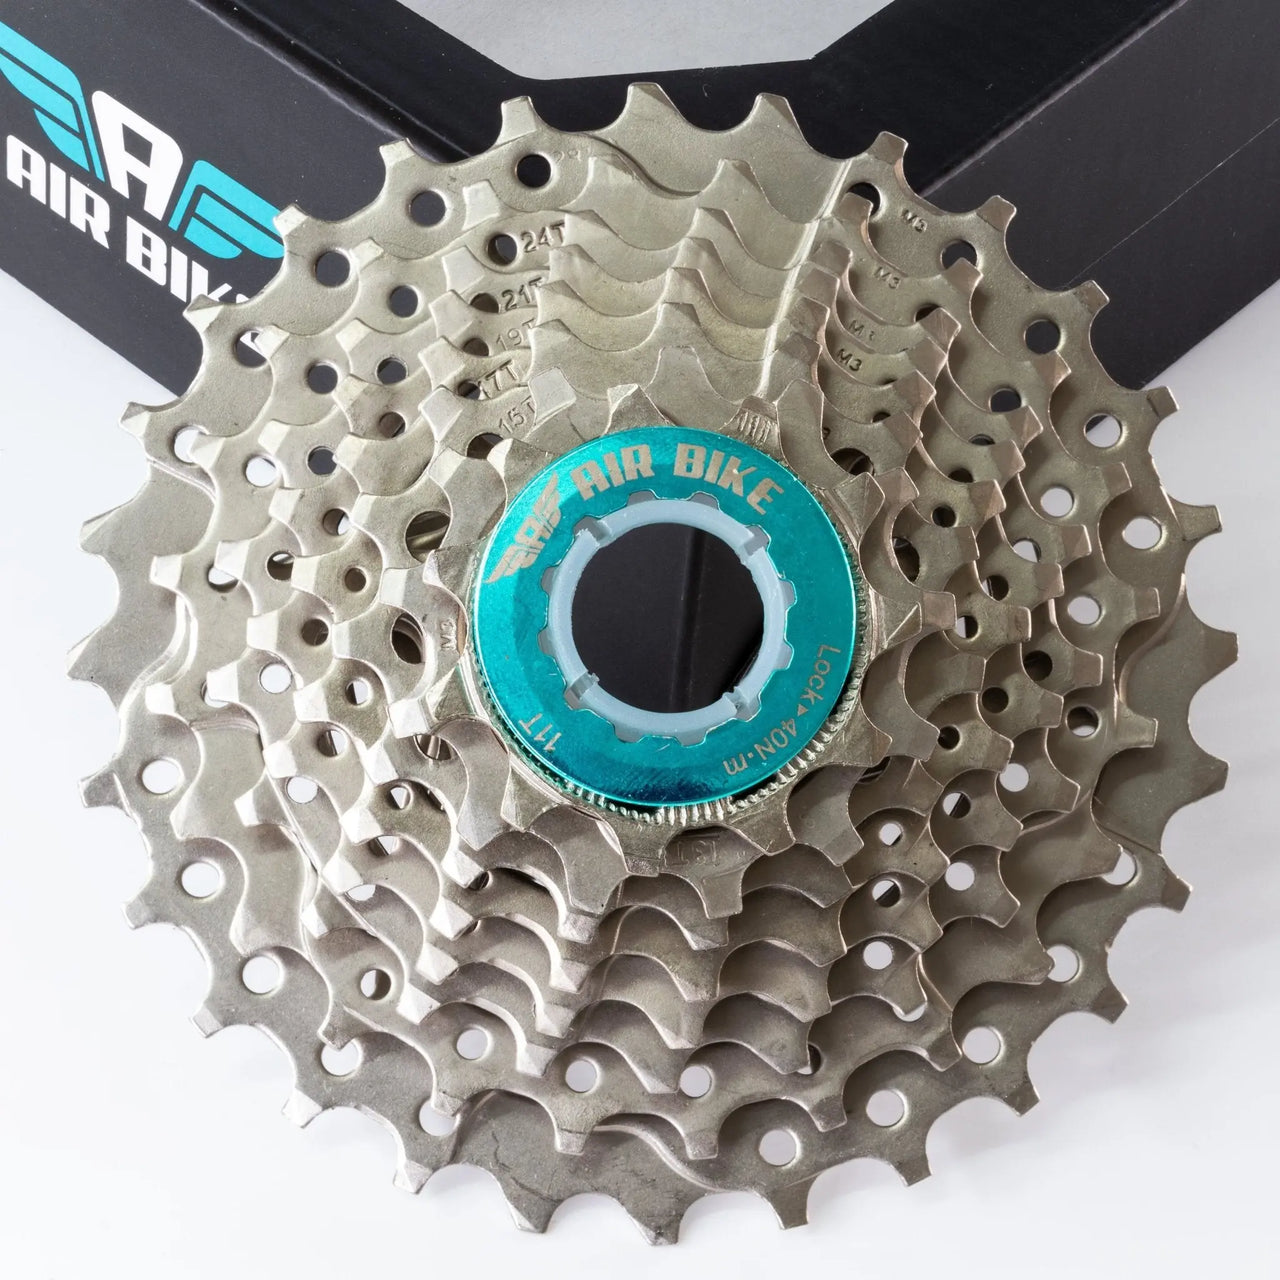 8 Speed 11-28T Cassette MTB fits Shimano & Sram HG Hubs - AirBike.uk - Air BikeBicycle Cassettes & Freewheels